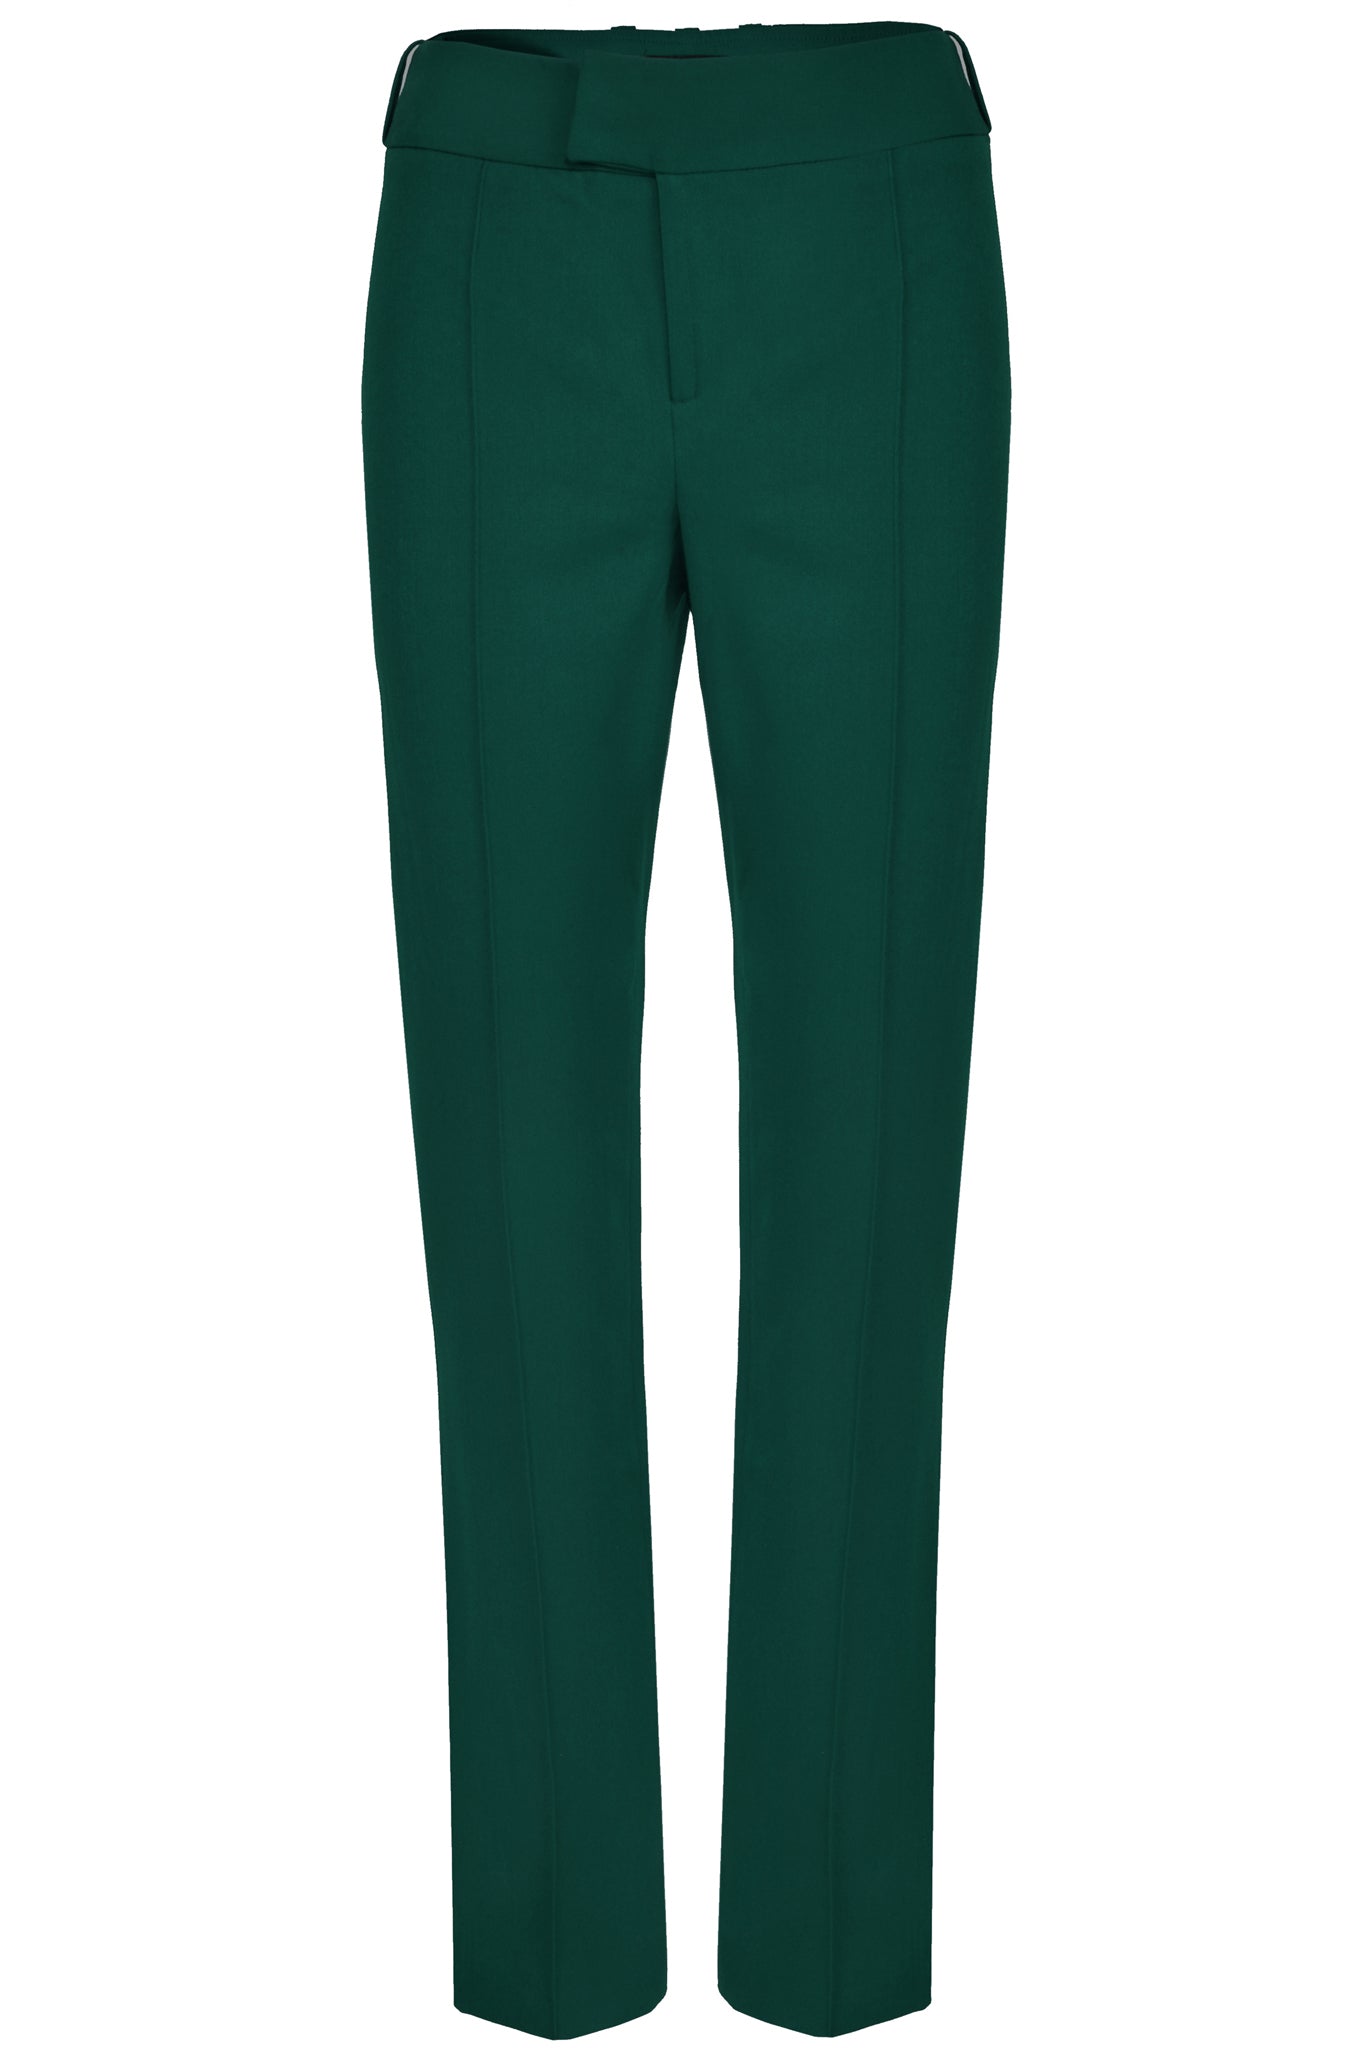 Emerald Green Cropped Cigarette Trousers